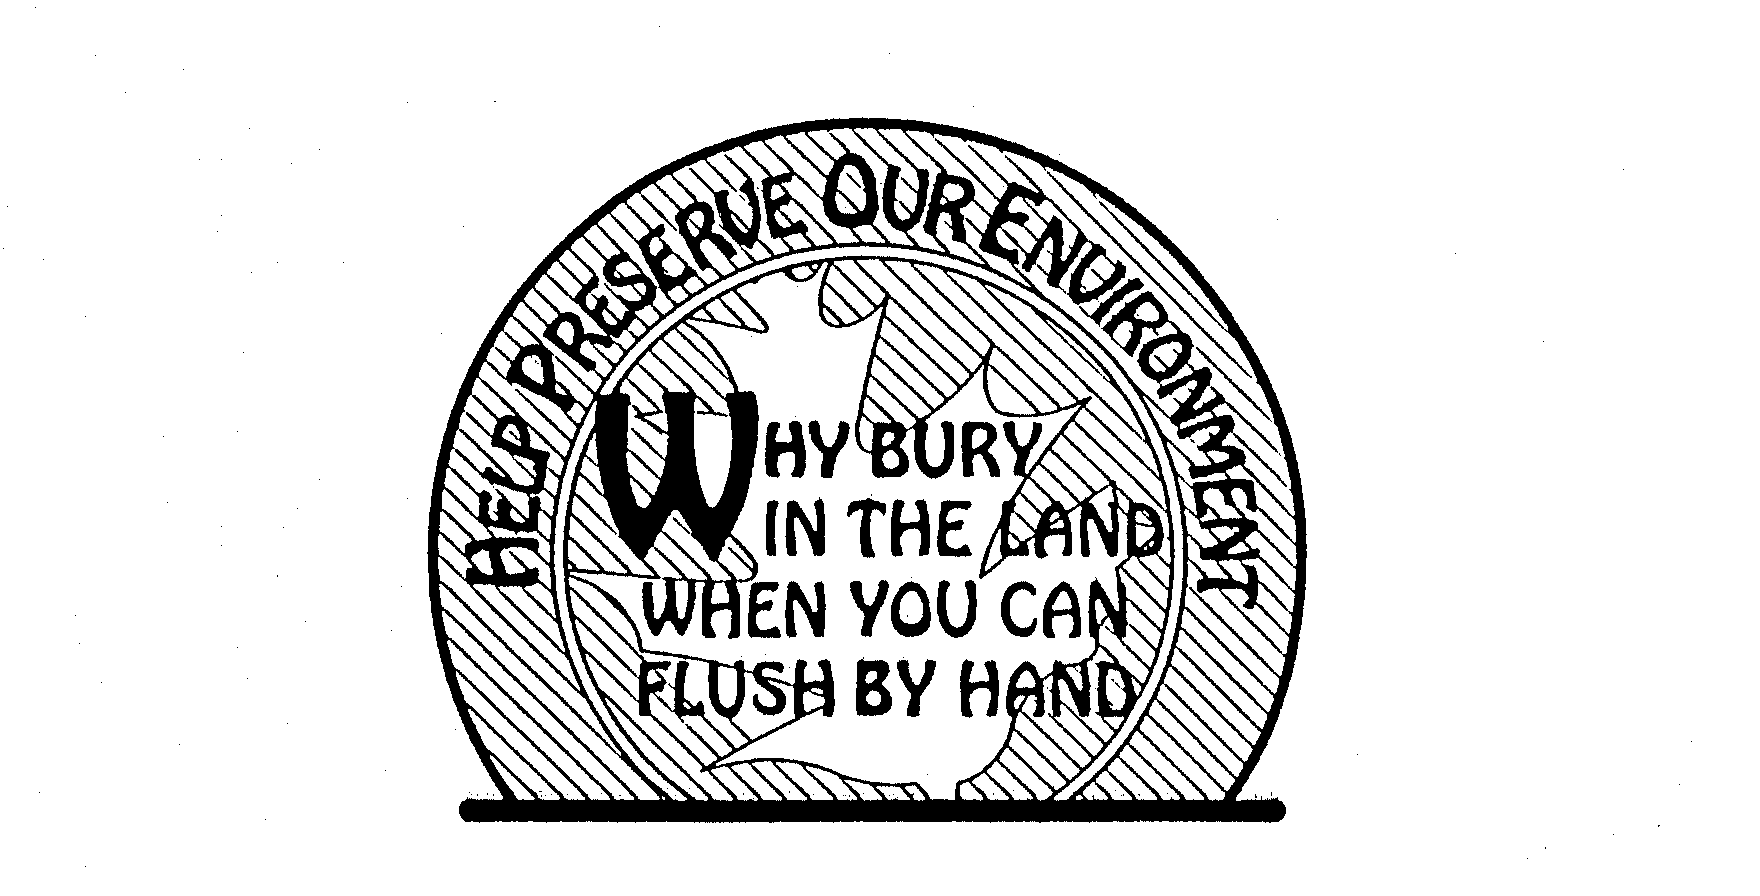  HELP PRESERVE OUR ENVIRONMENT WHY BURY IN THE LAND WHEN YOU CAN FLUSH BY HAND